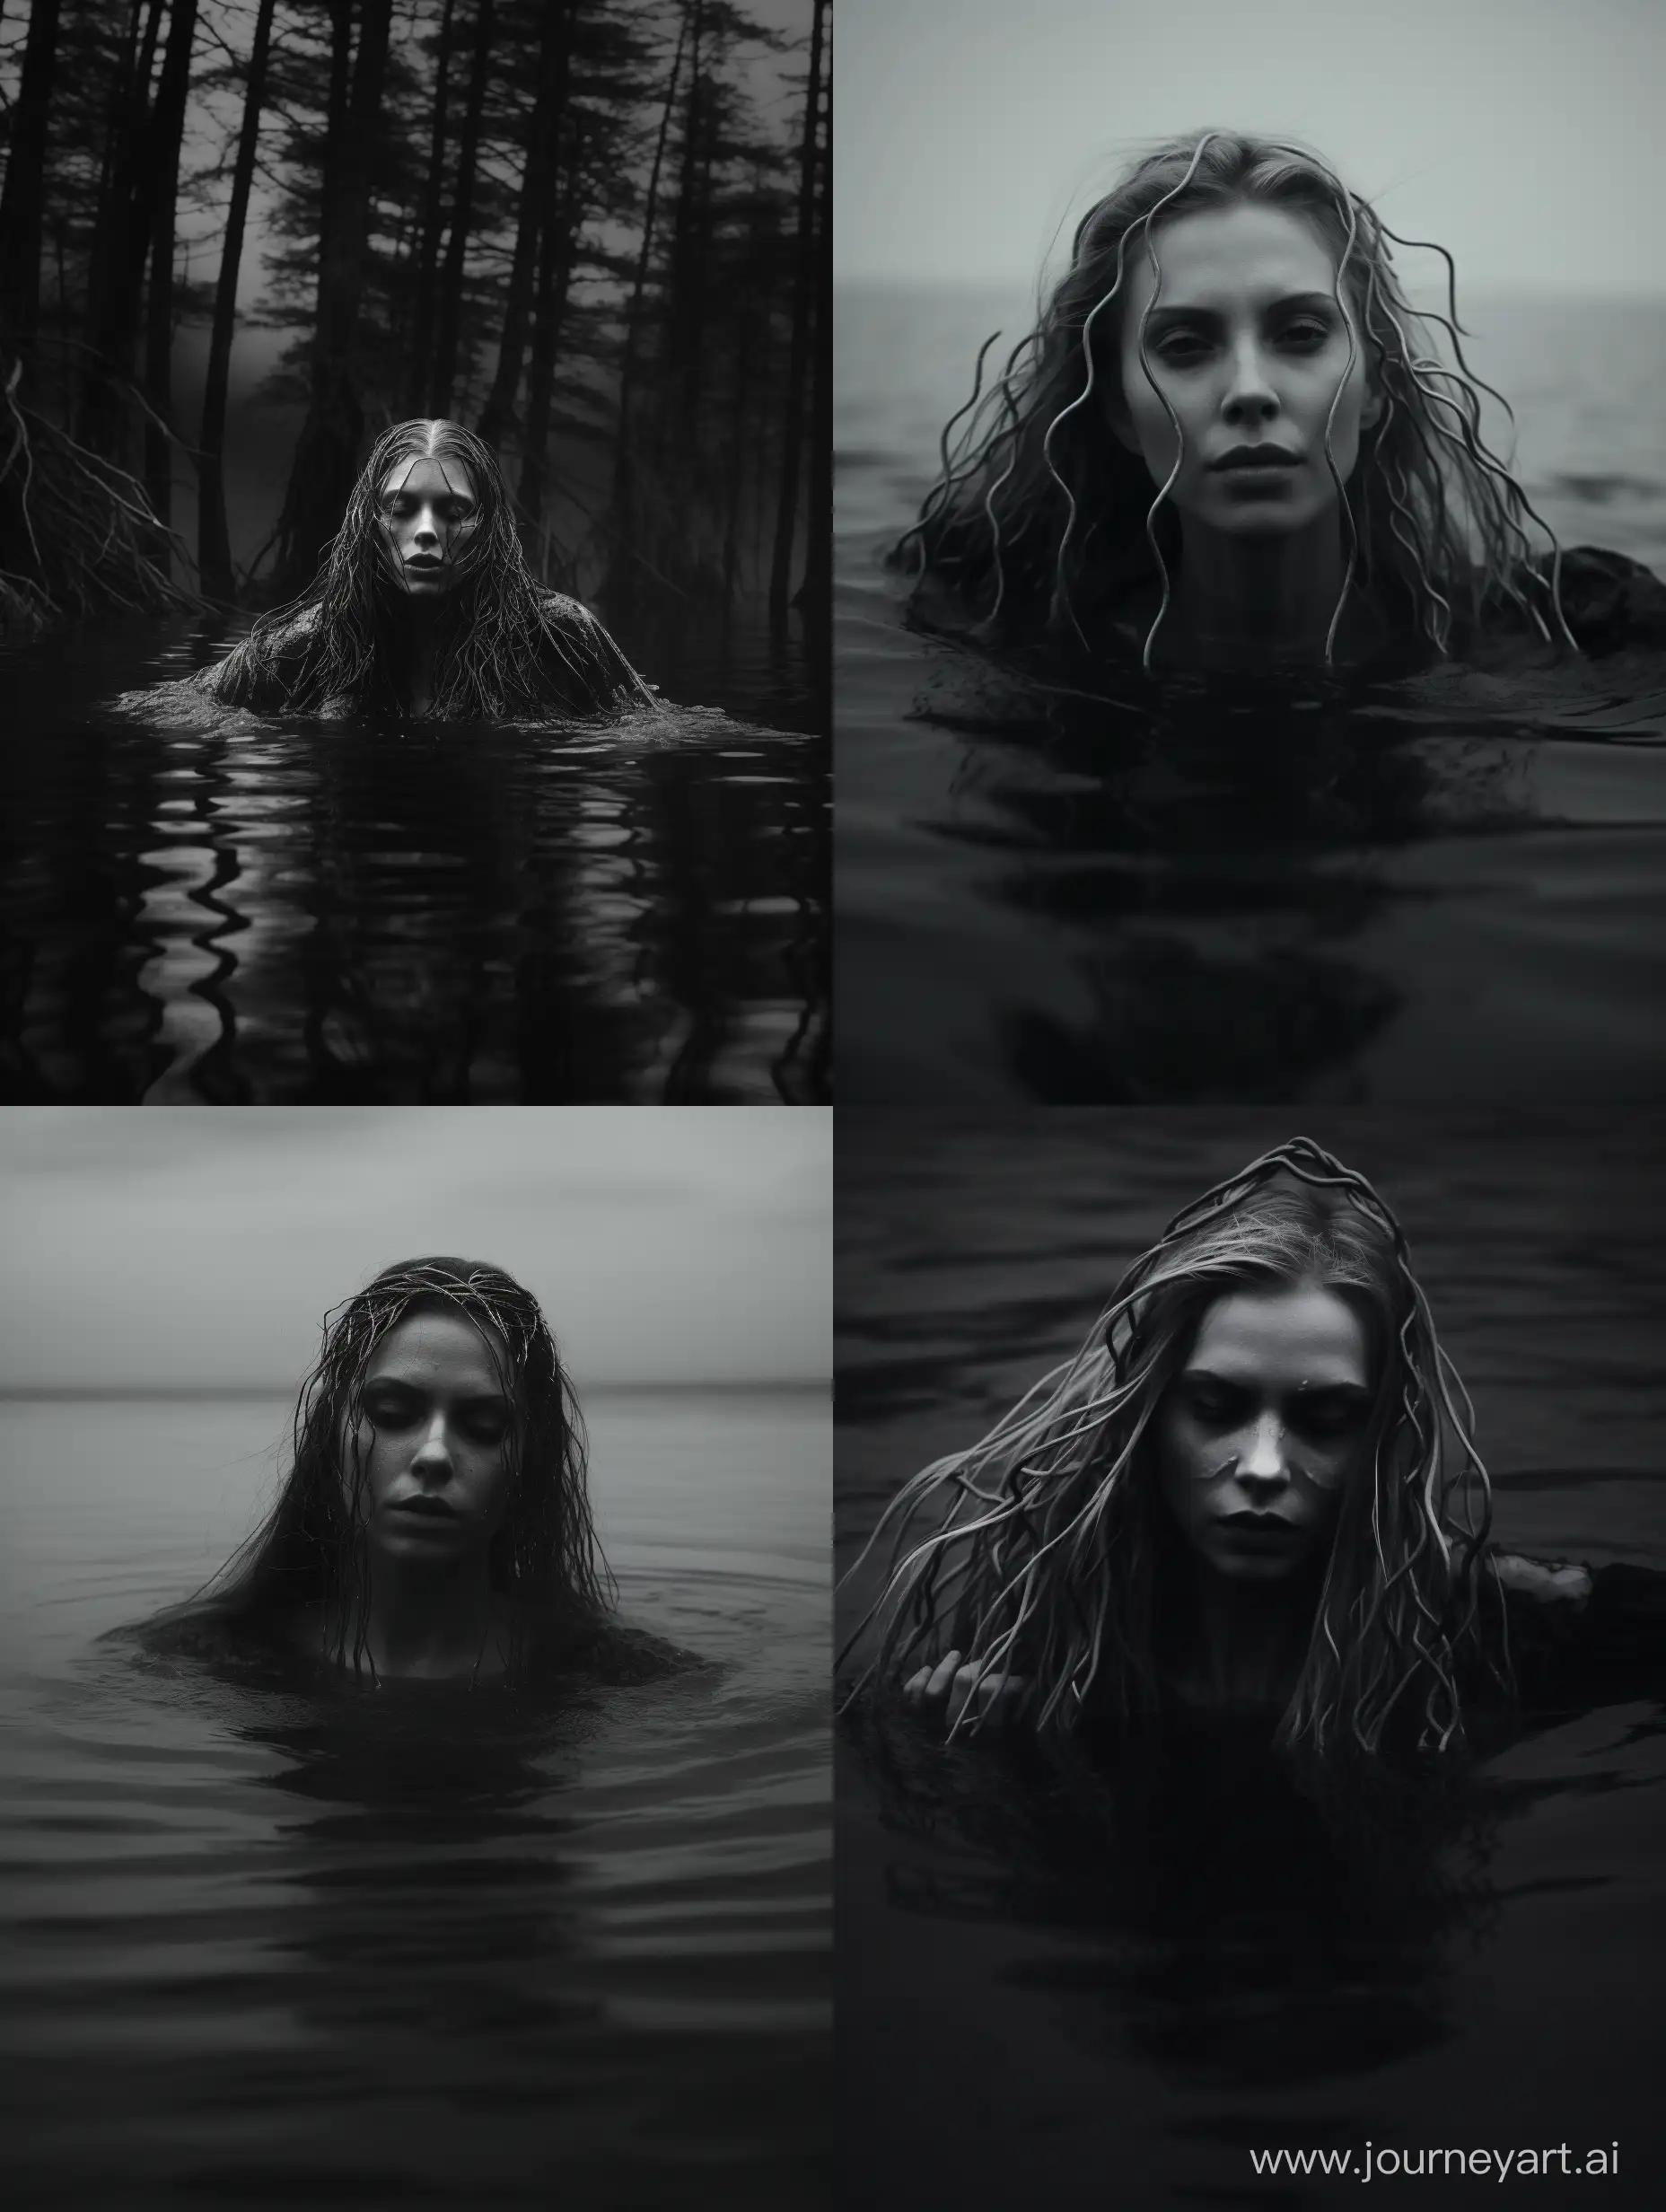 Eerie-Pagan-Witch-Rising-from-Murky-Waters-Disturbing-Folk-Horror-Image